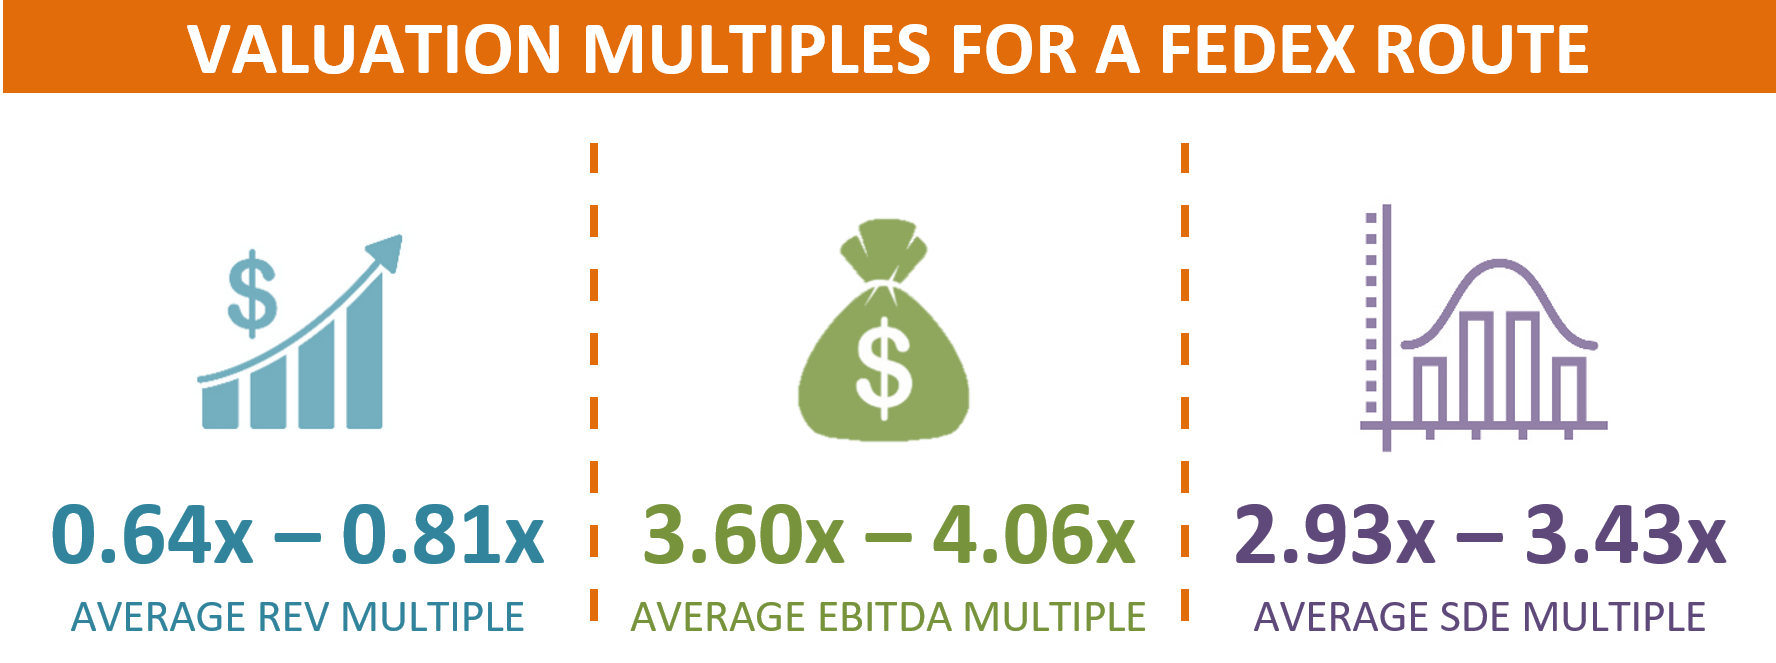 Valuation Multiples For FedEx Routes